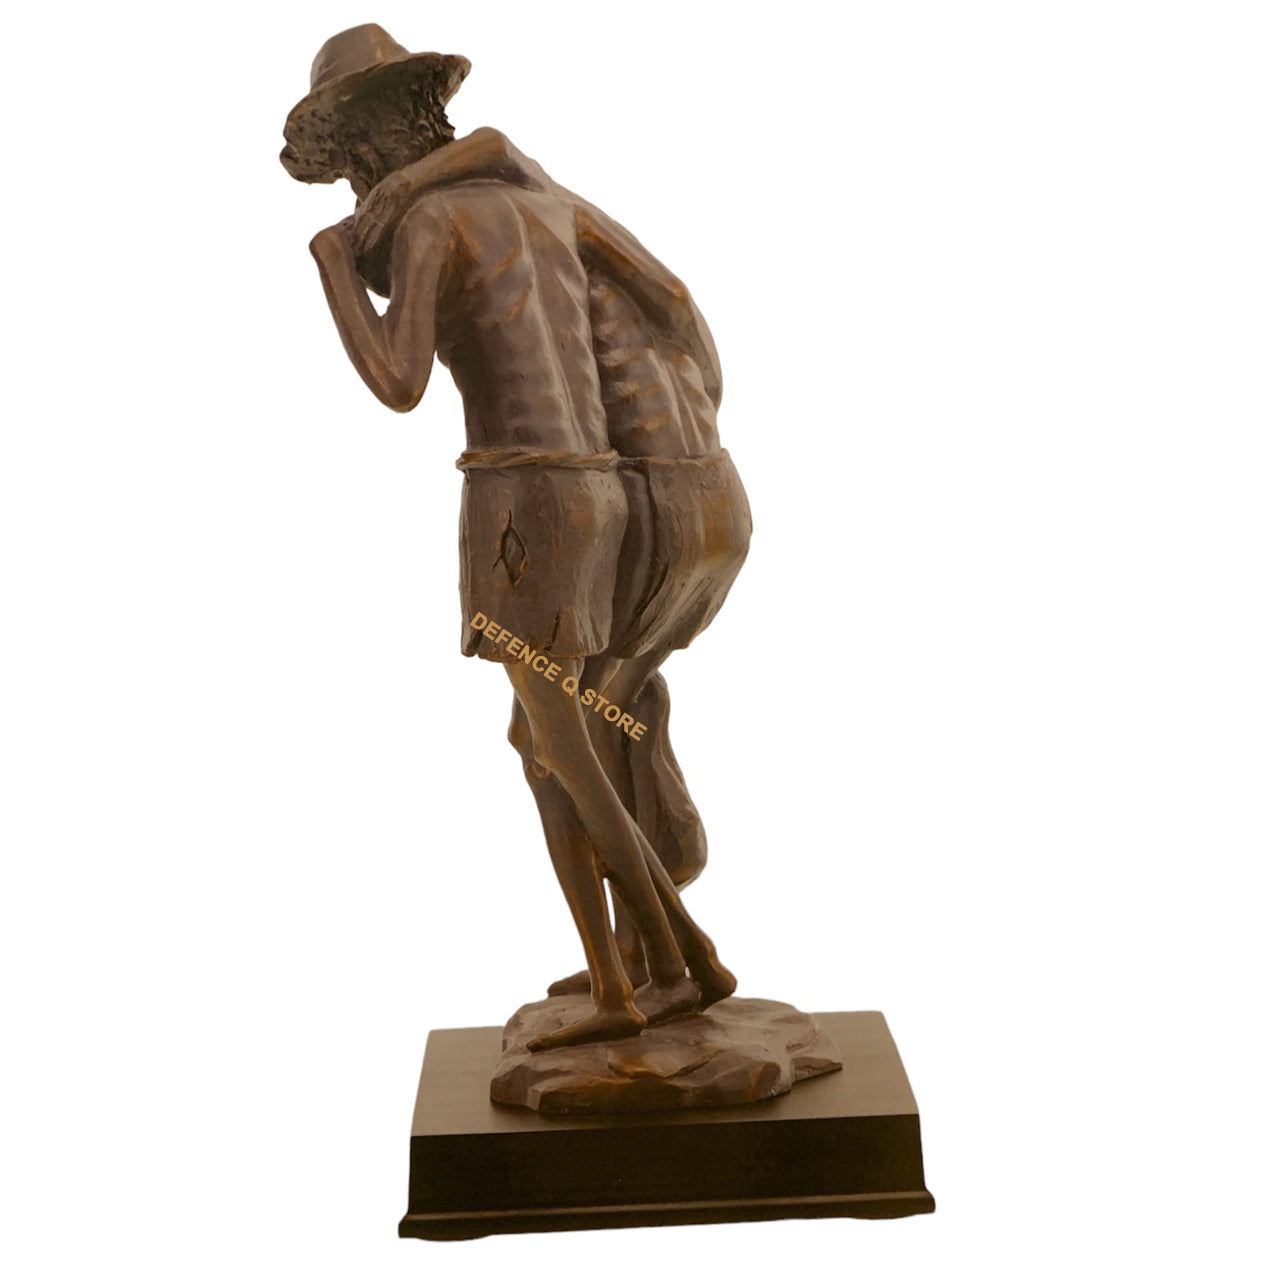 This figurine, commemorating the Sandakan prisoner of war camp in Borneo, pays tribute to the Australian and British victims of Japanese brutality in World War II. A solemn promise to remember the truth, it stands for all nations who lost loved ones to the cruelty of Japanese camps. www.defenceqstore.com.au